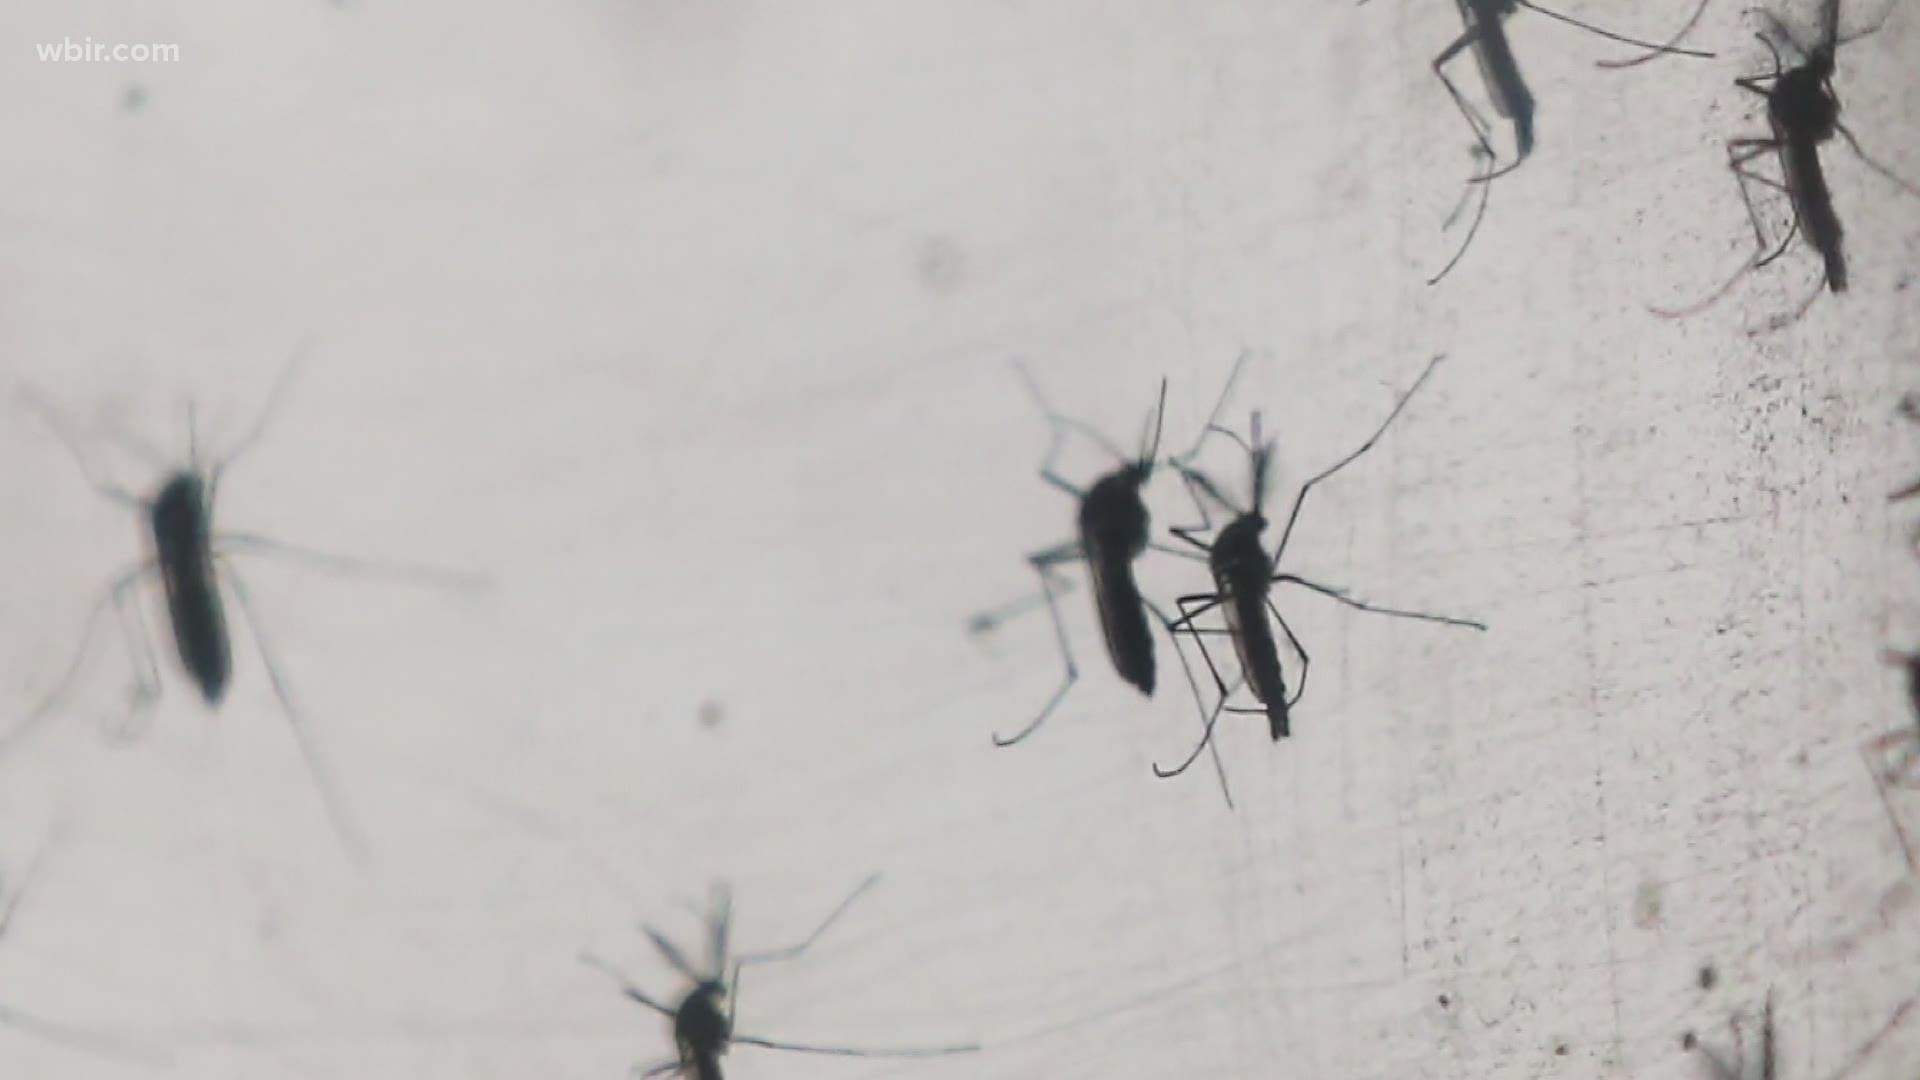 If you've been outside recently, you likely noticed that the mosquitoes are back in East Tennessee.